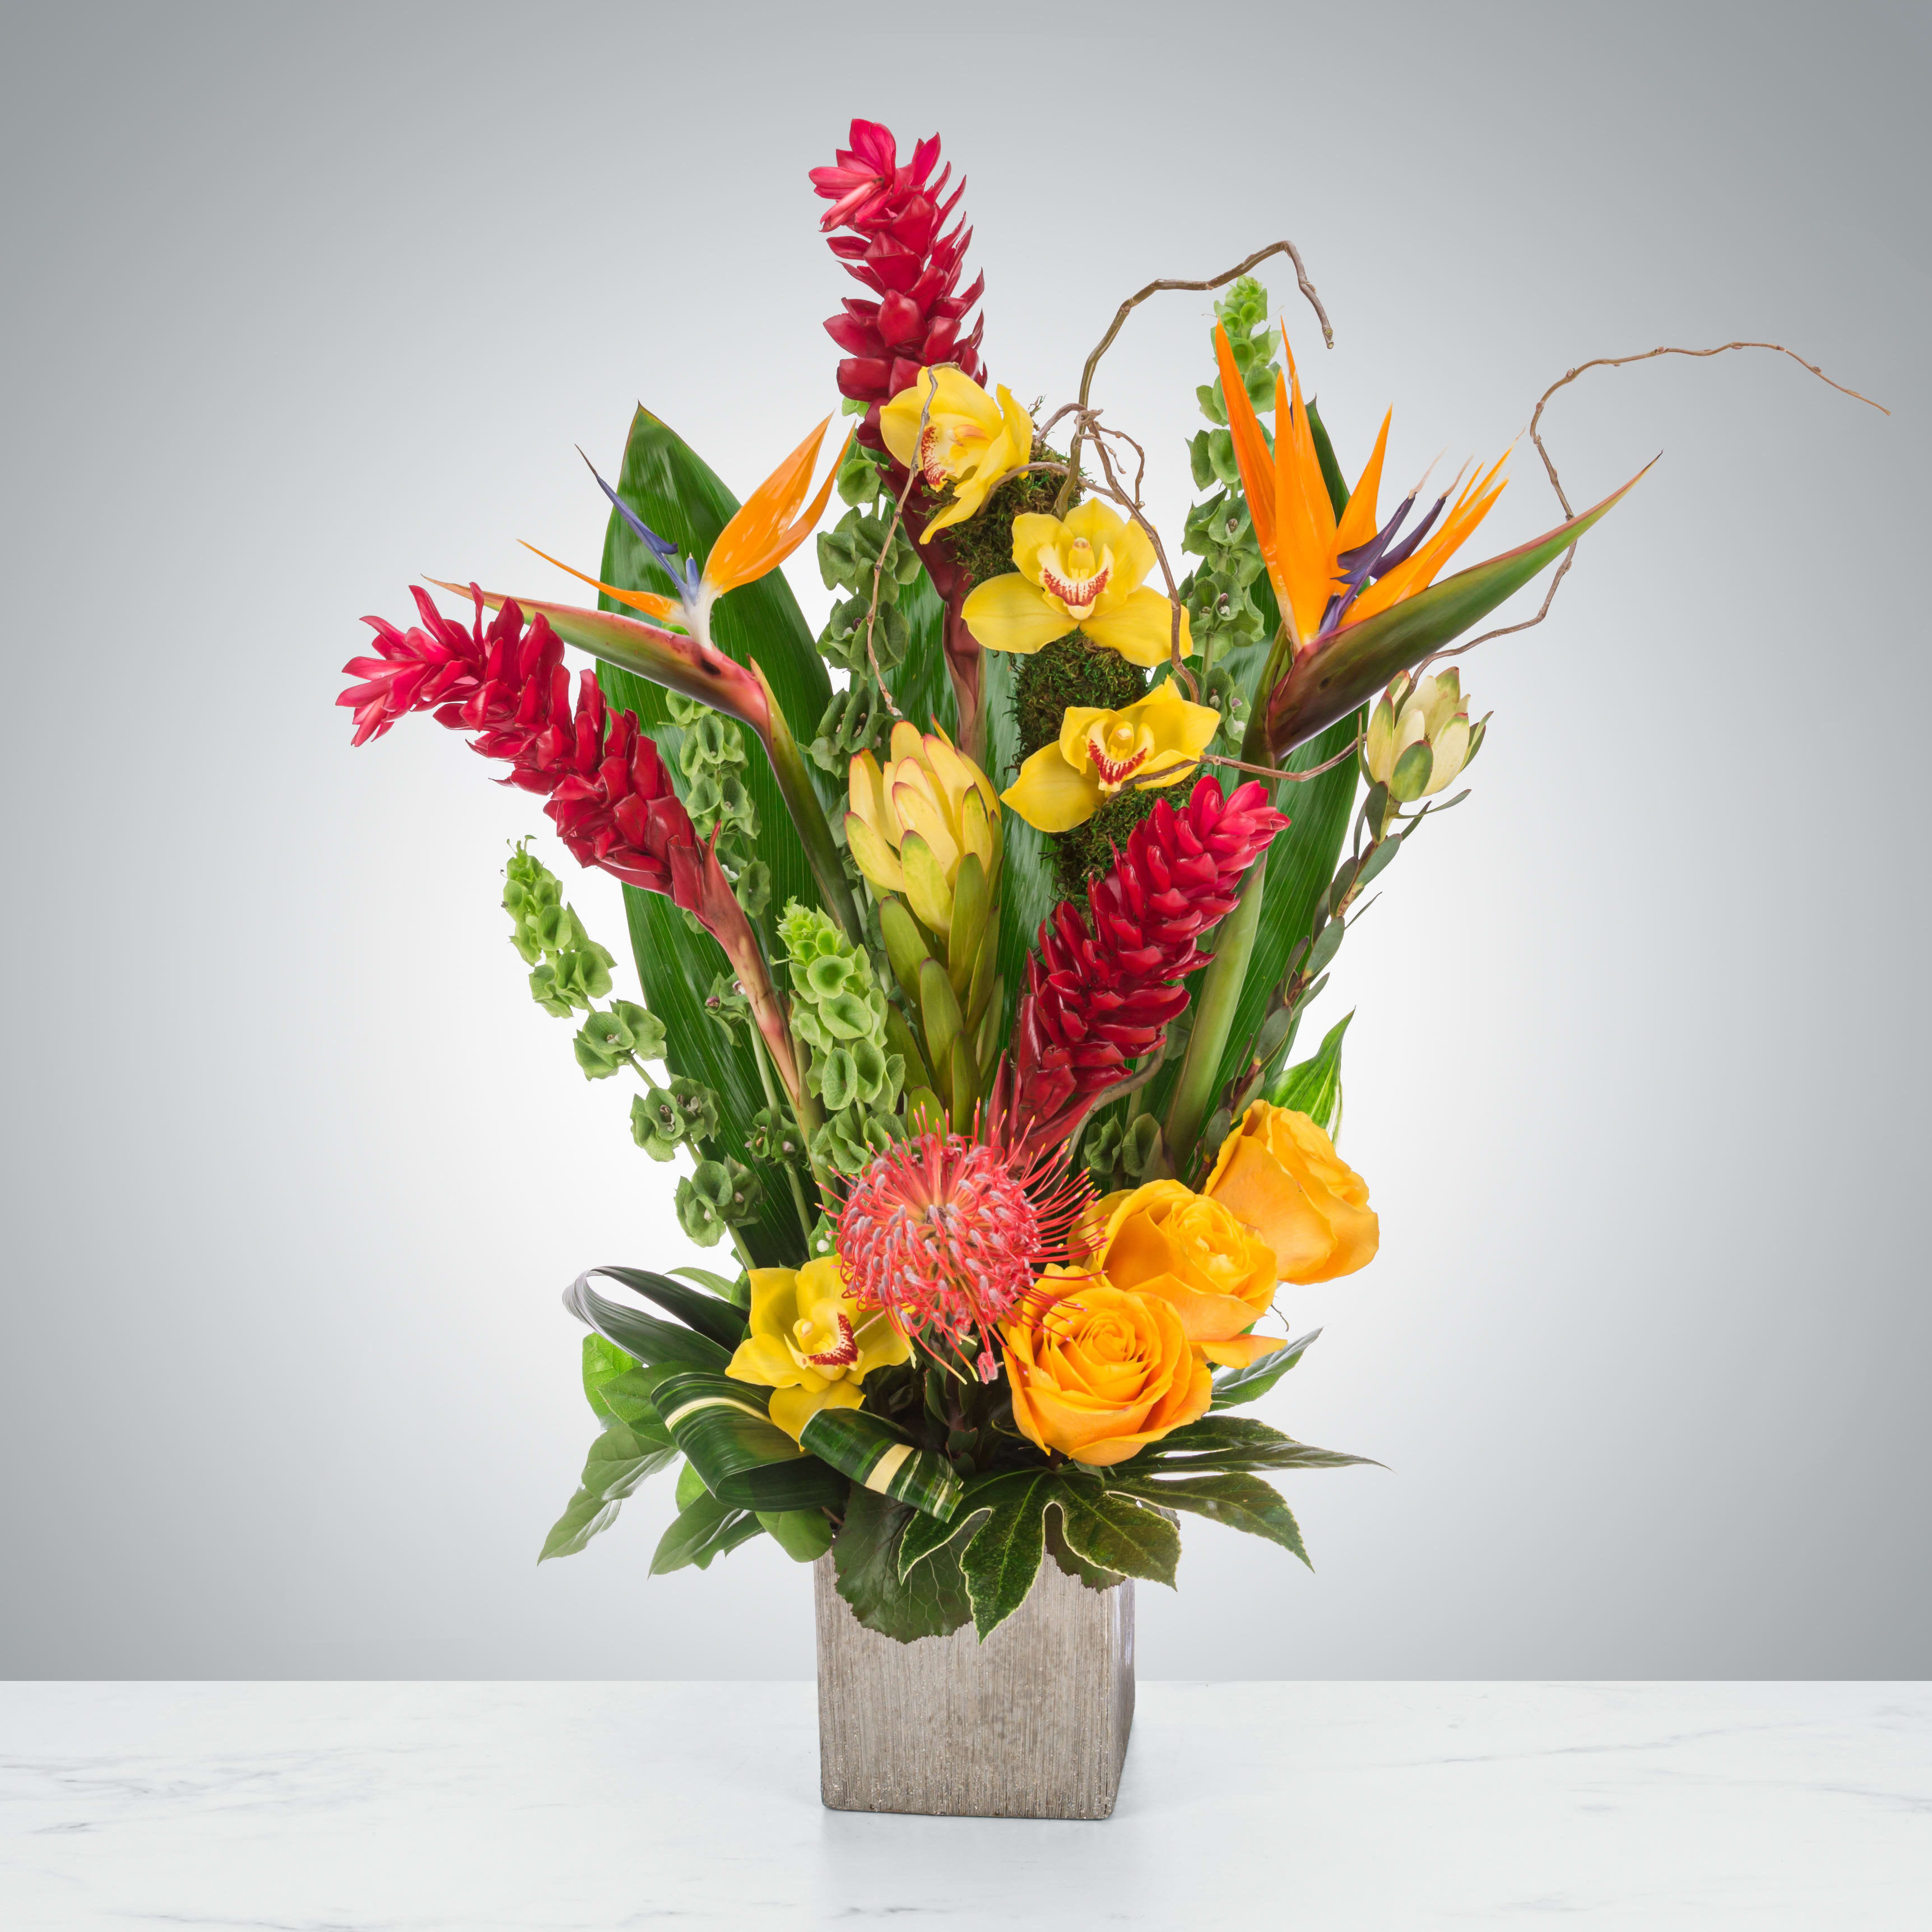 Tropic Like It's Hot by BloomNation™ - Tropical plants come together in this one-sided tall standing arrangement. Featuring birds of paradise, ginger, and pincushion protea, this tropical selection would look lovely in any home.  Approximate Dimensions: 22&quot;D x 30&quot;H